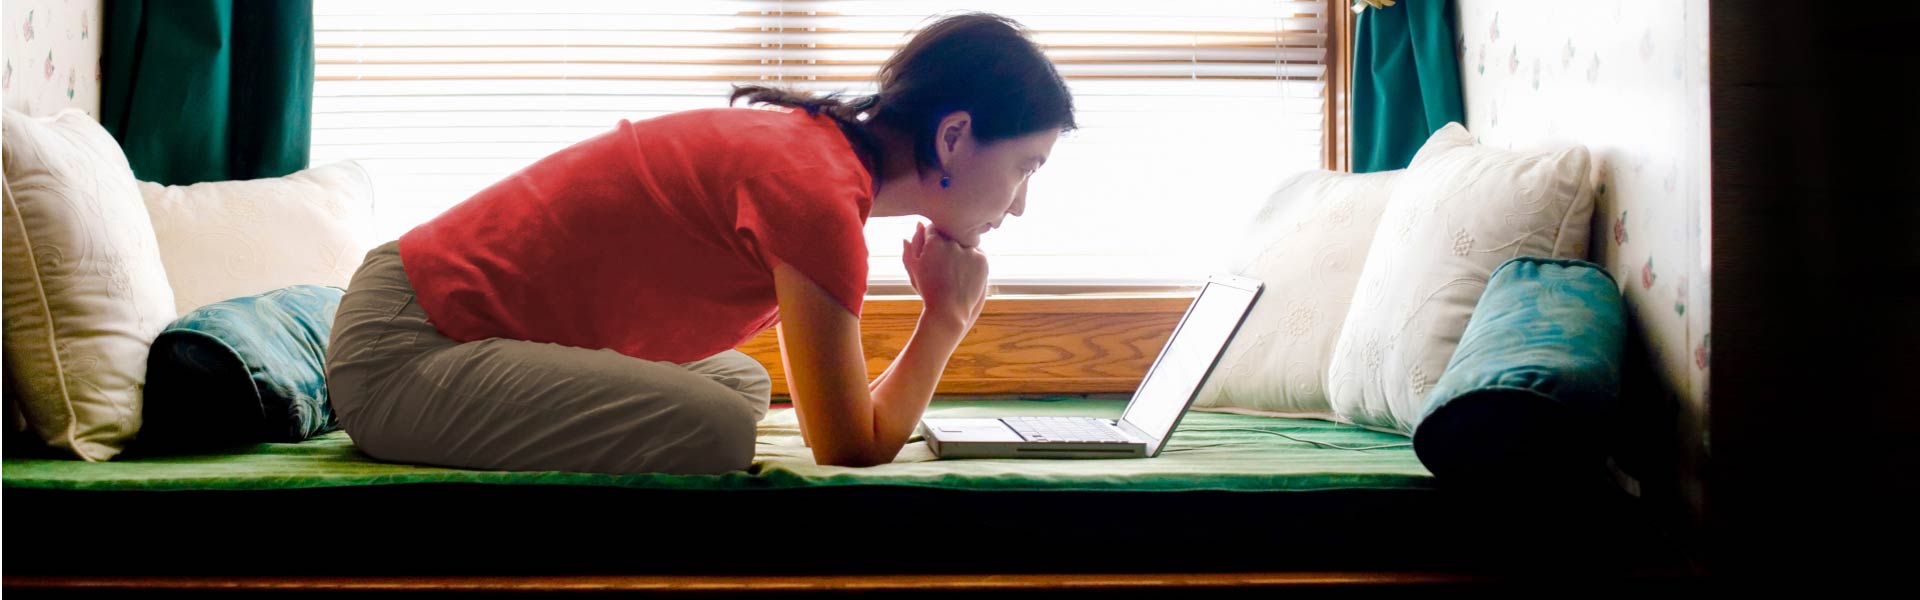 A person sits near a window and leans forward on their elbows while intently looking at their laptop.